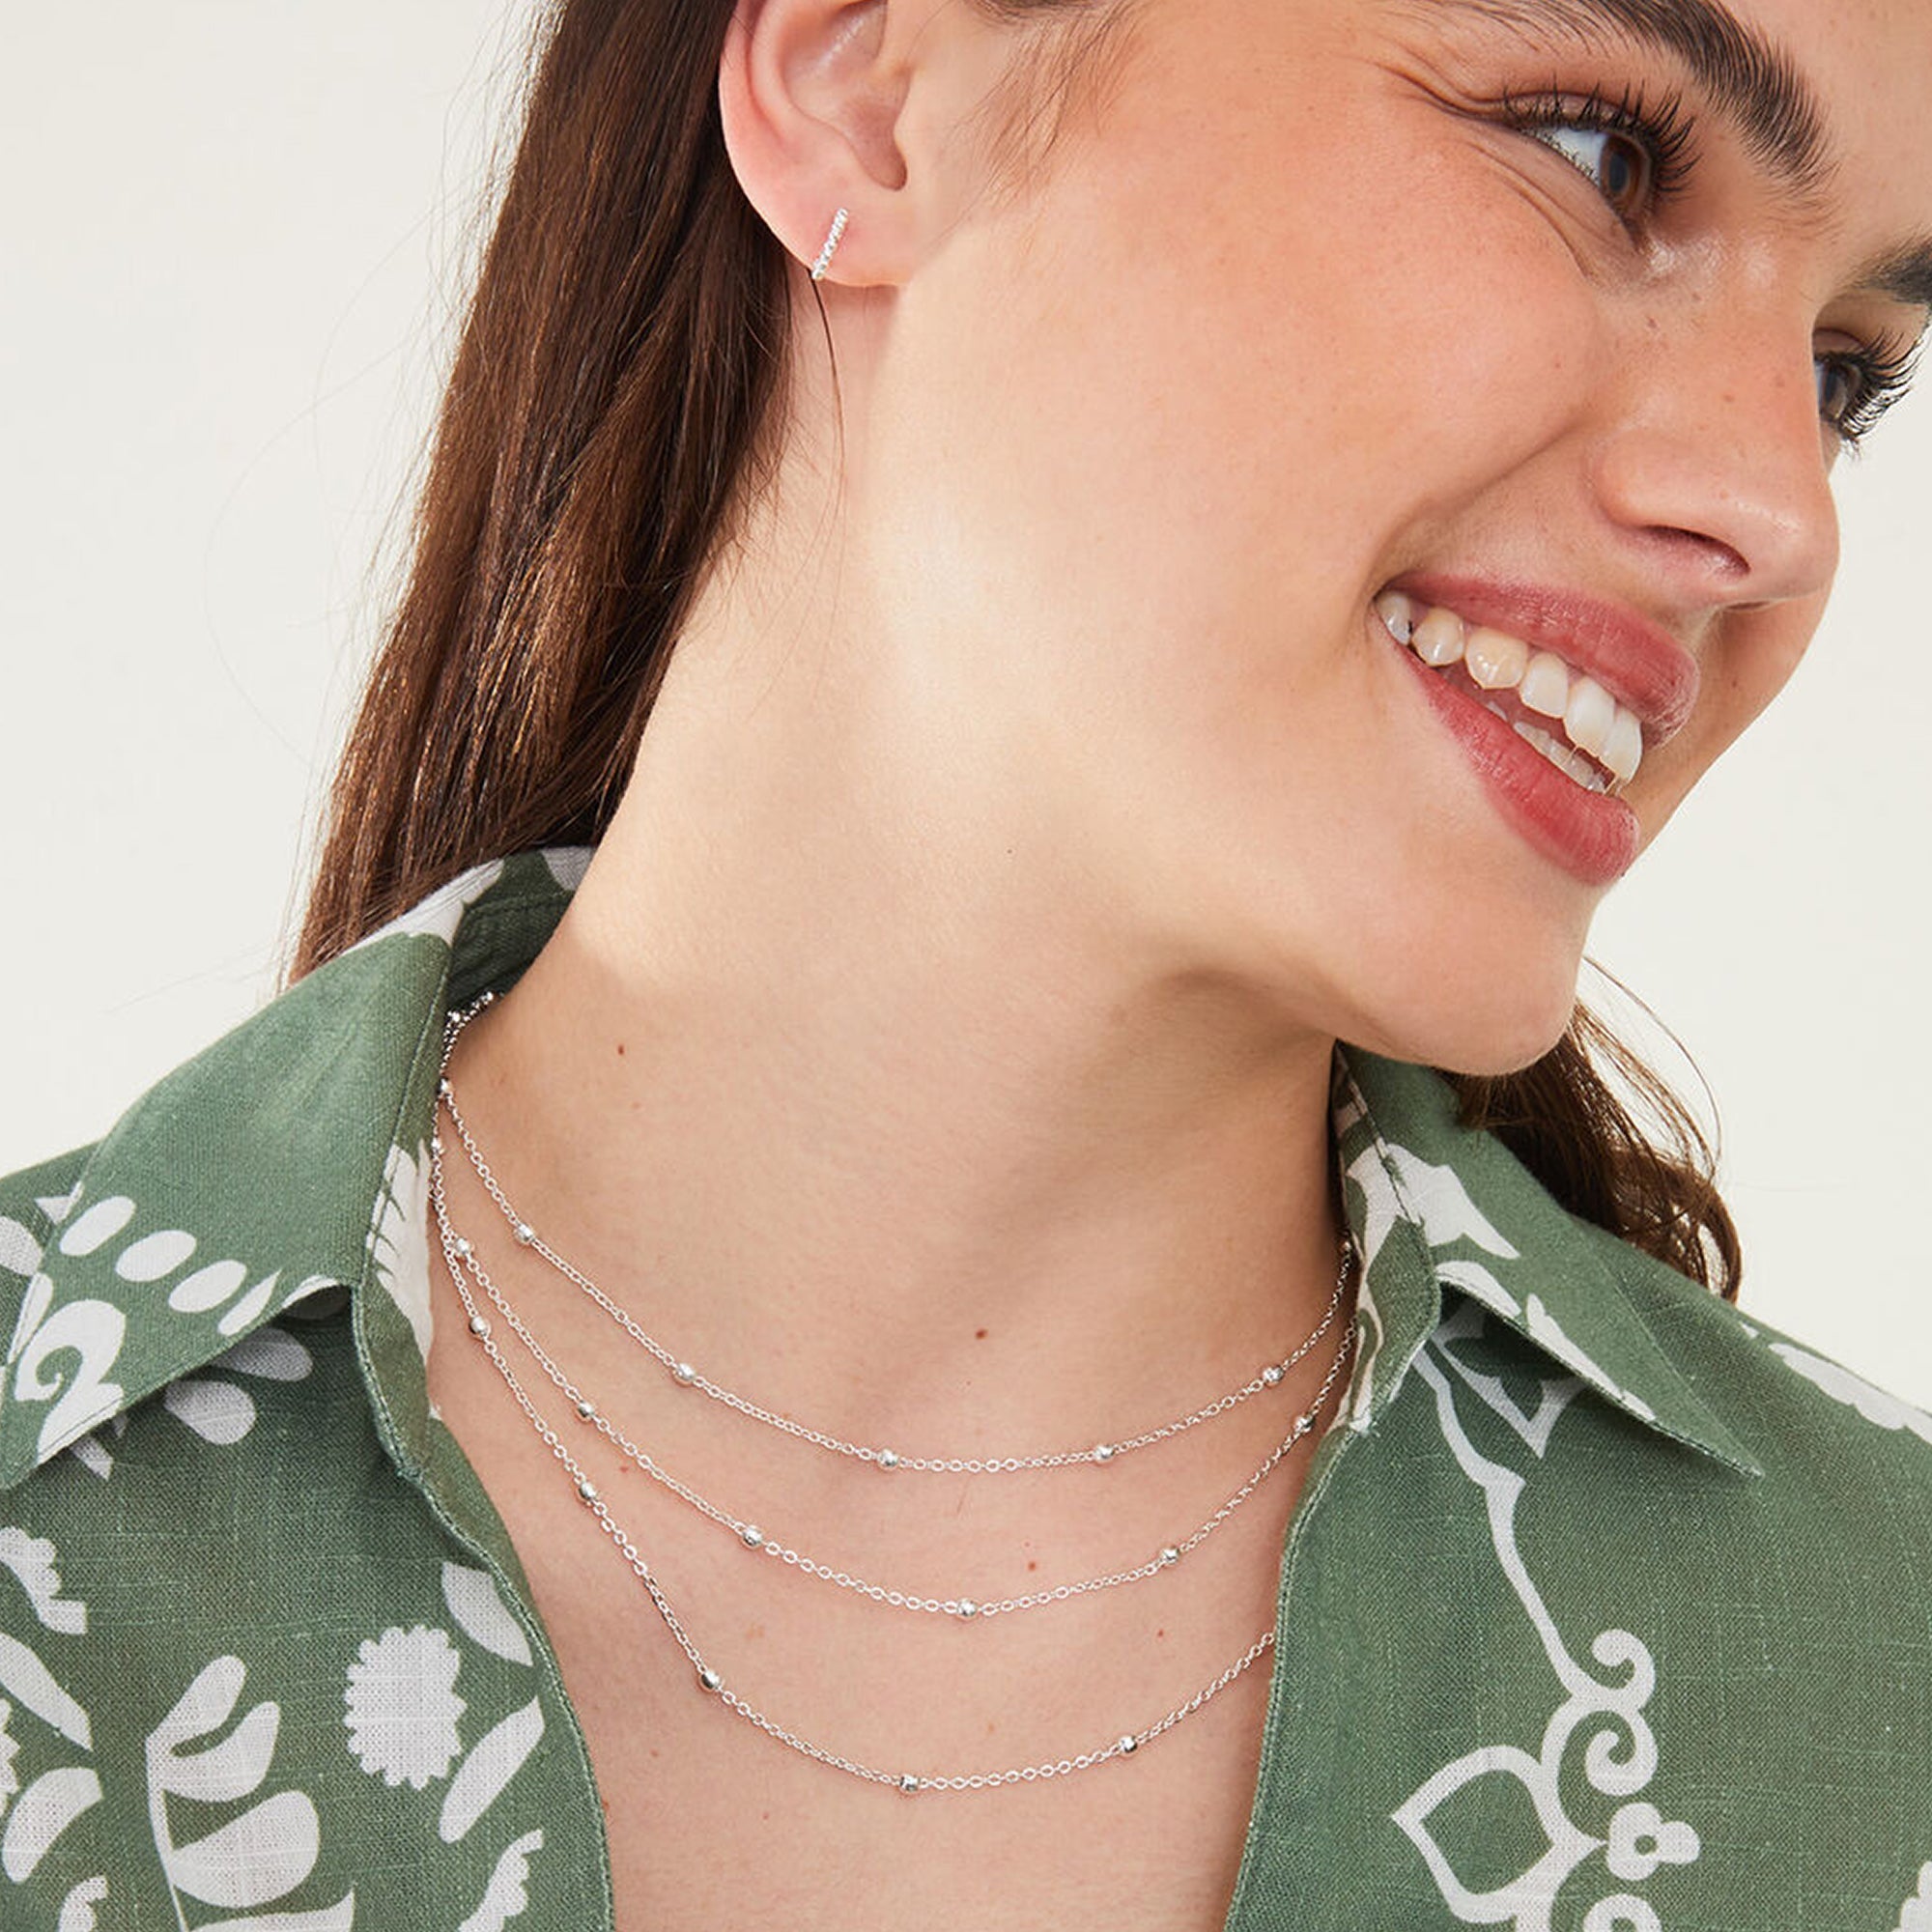 Accessorize London Women's Silver Layered Station Bead Necklace